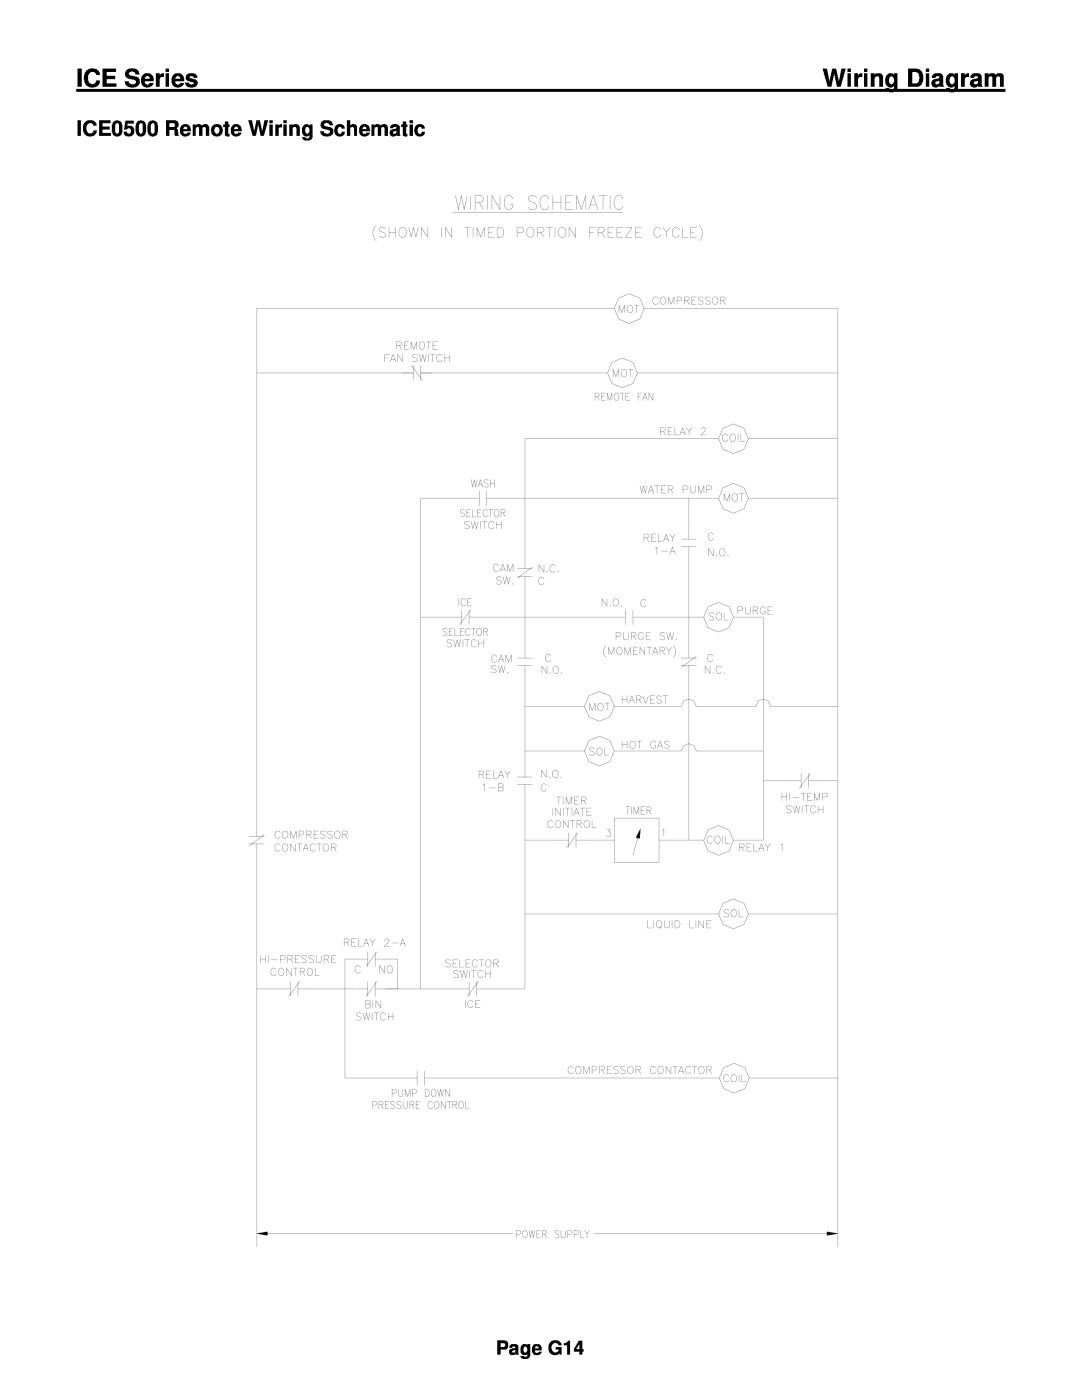 Ice-O-Matic ICE0250 Series installation manual ICE0500 Remote Wiring Schematic, ICE Series, Wiring Diagram, Page G14 